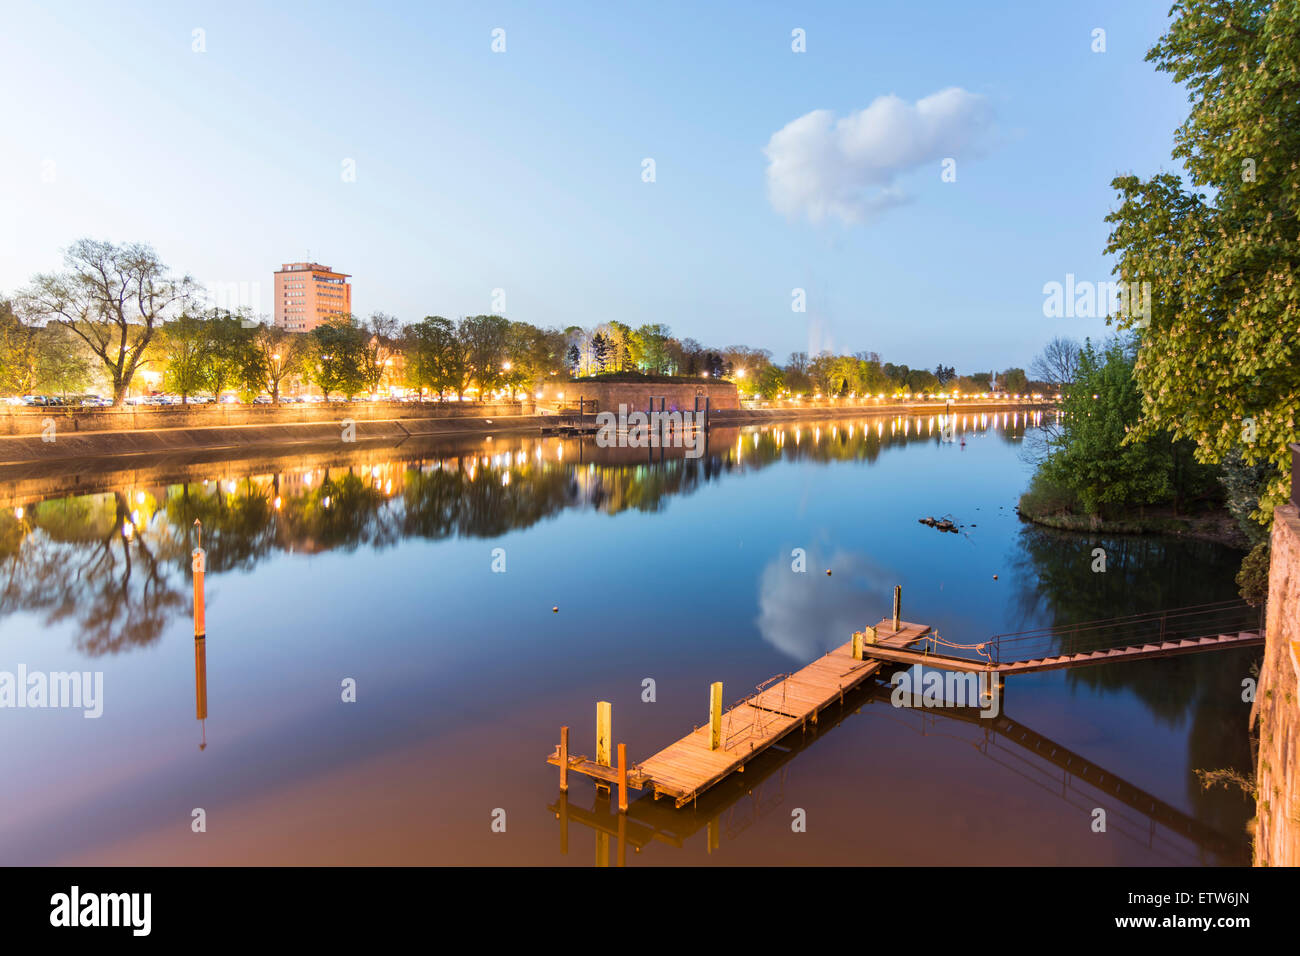 France, Thionville, Jetty at Moselle river Stock Photo